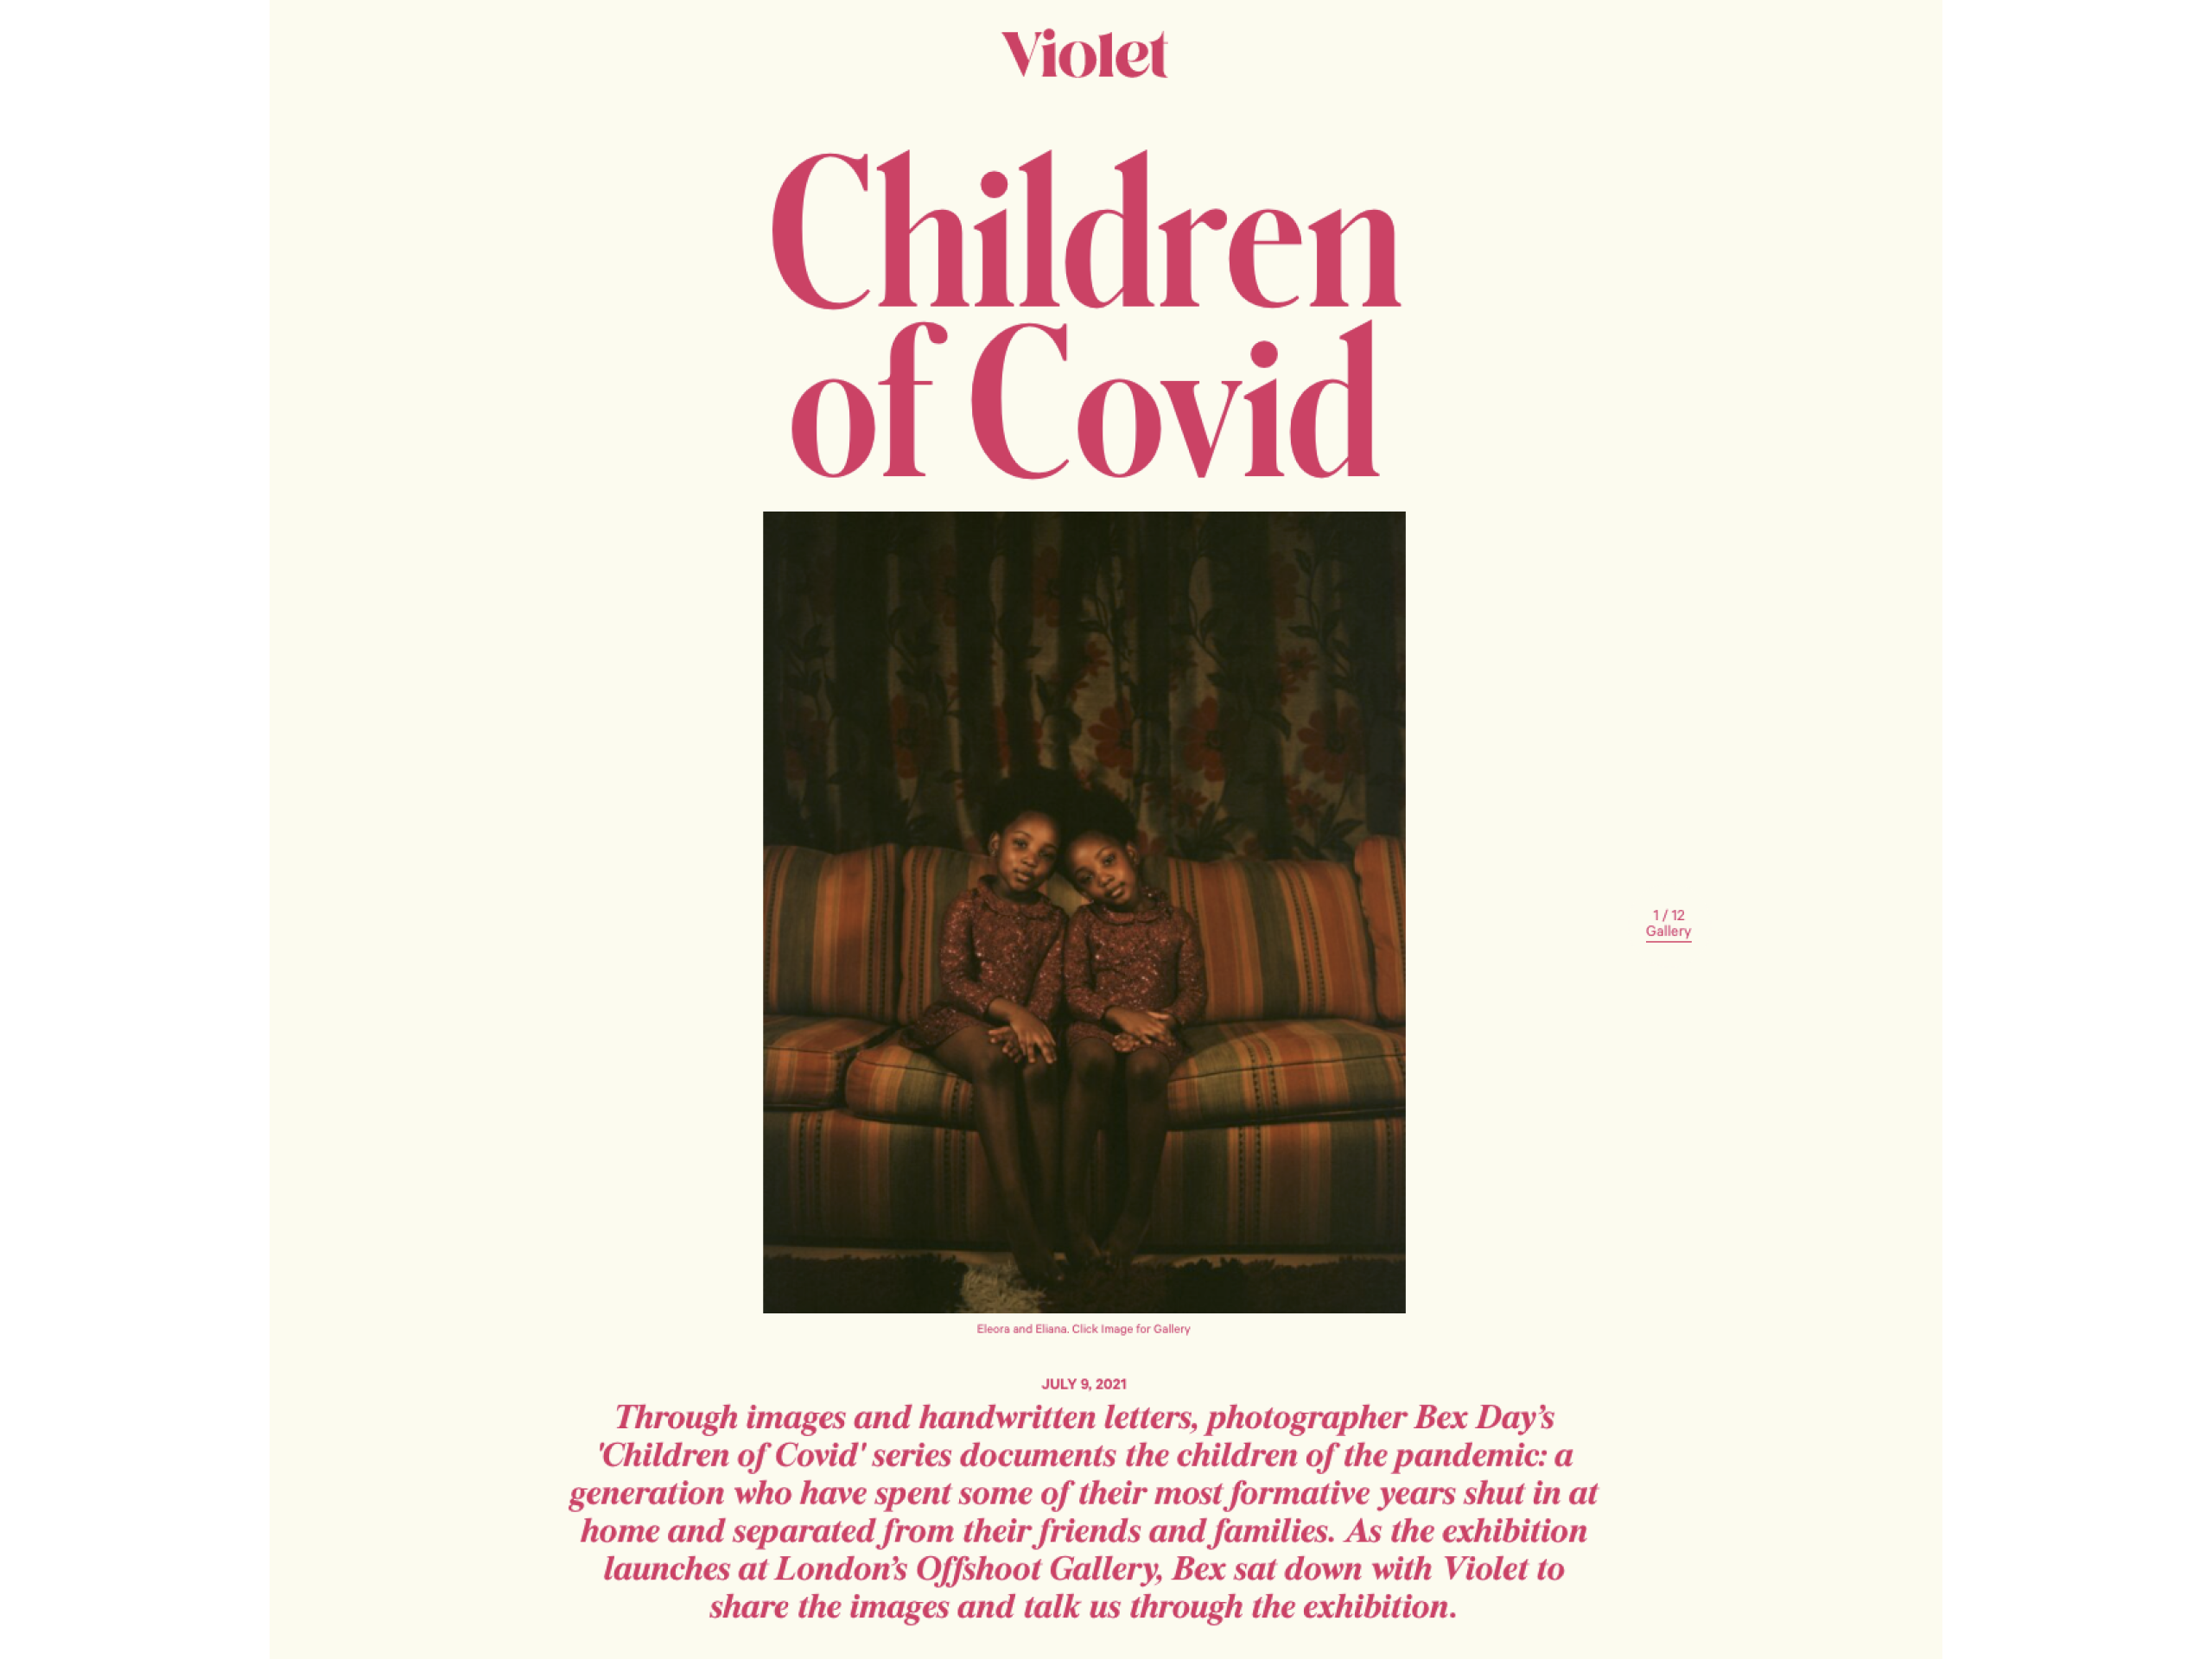 Children of Covid a story by BEX DAY on Violet Book